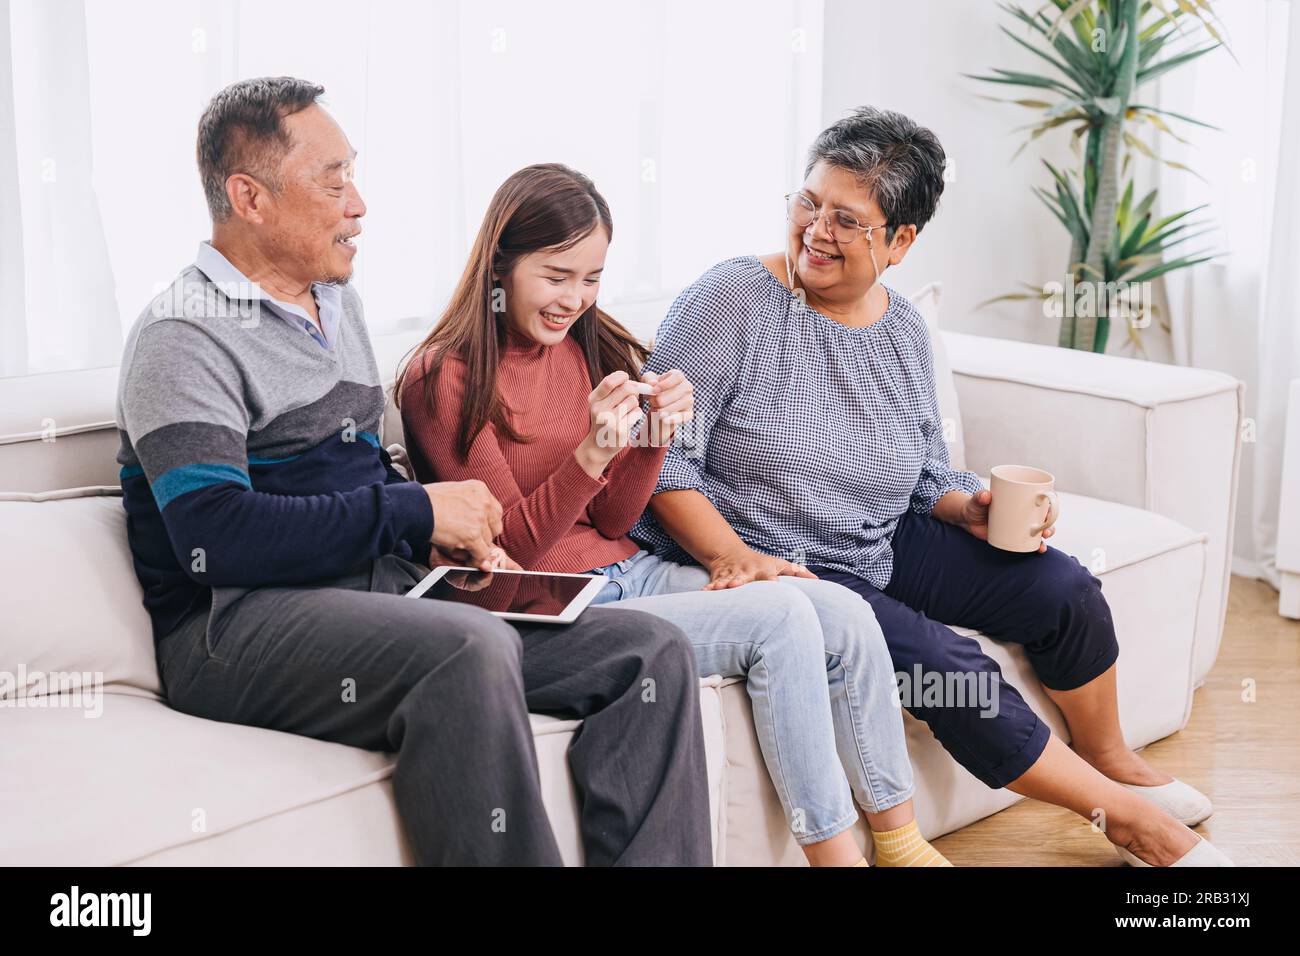 daughter asian girl teen happy exciting gladly with pregnancy test found result pregnant positive happy to have a baby good news with mature parents e Stock Photo